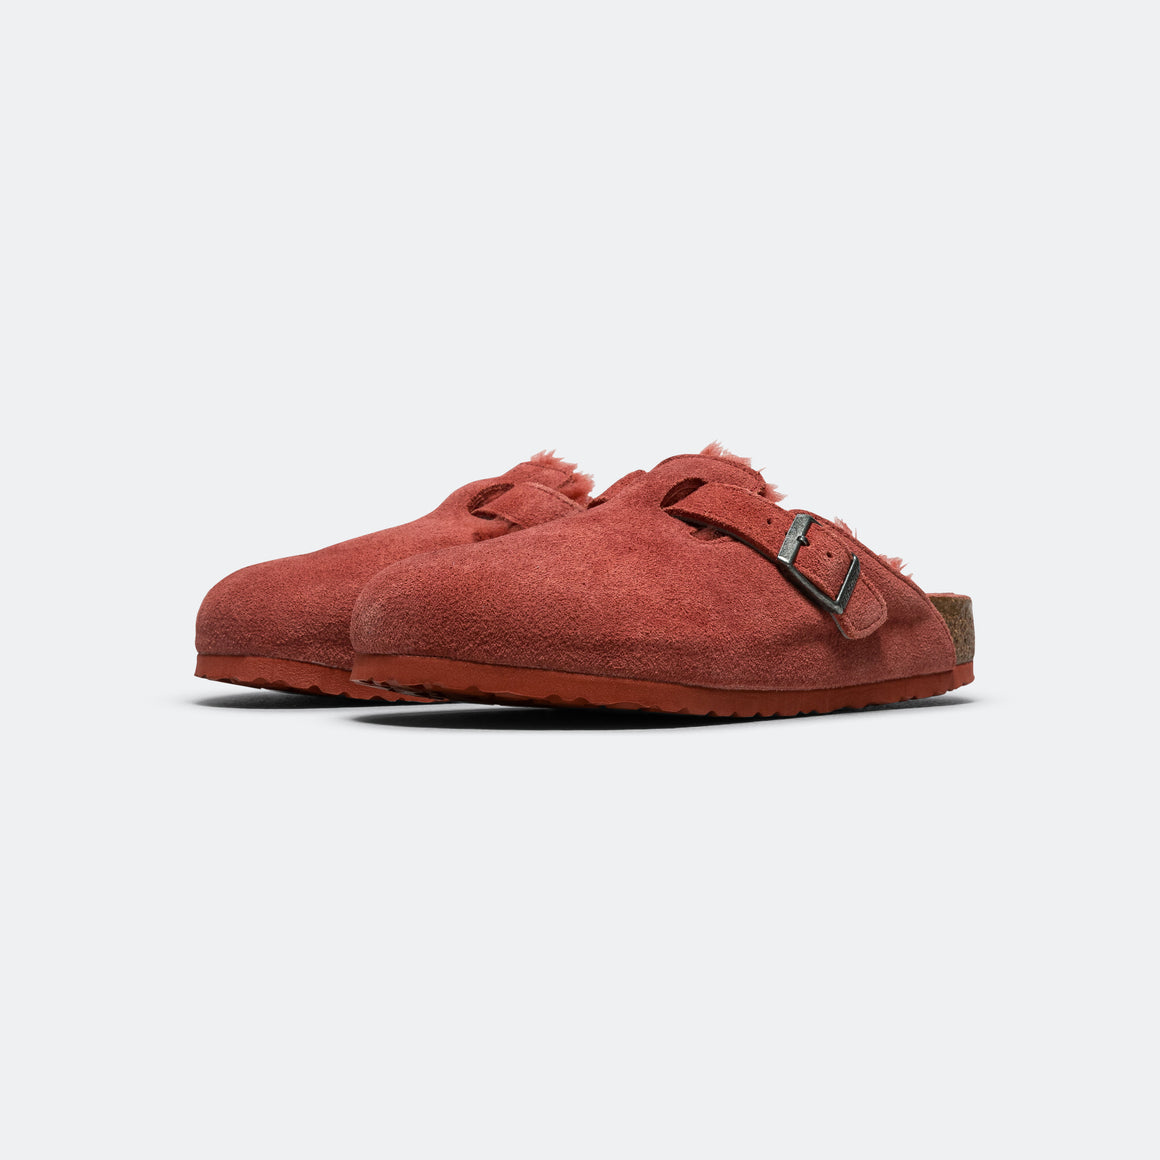 Birkenstock - Boston - Sienna Red Suede Leather/Shearling - UP THERE